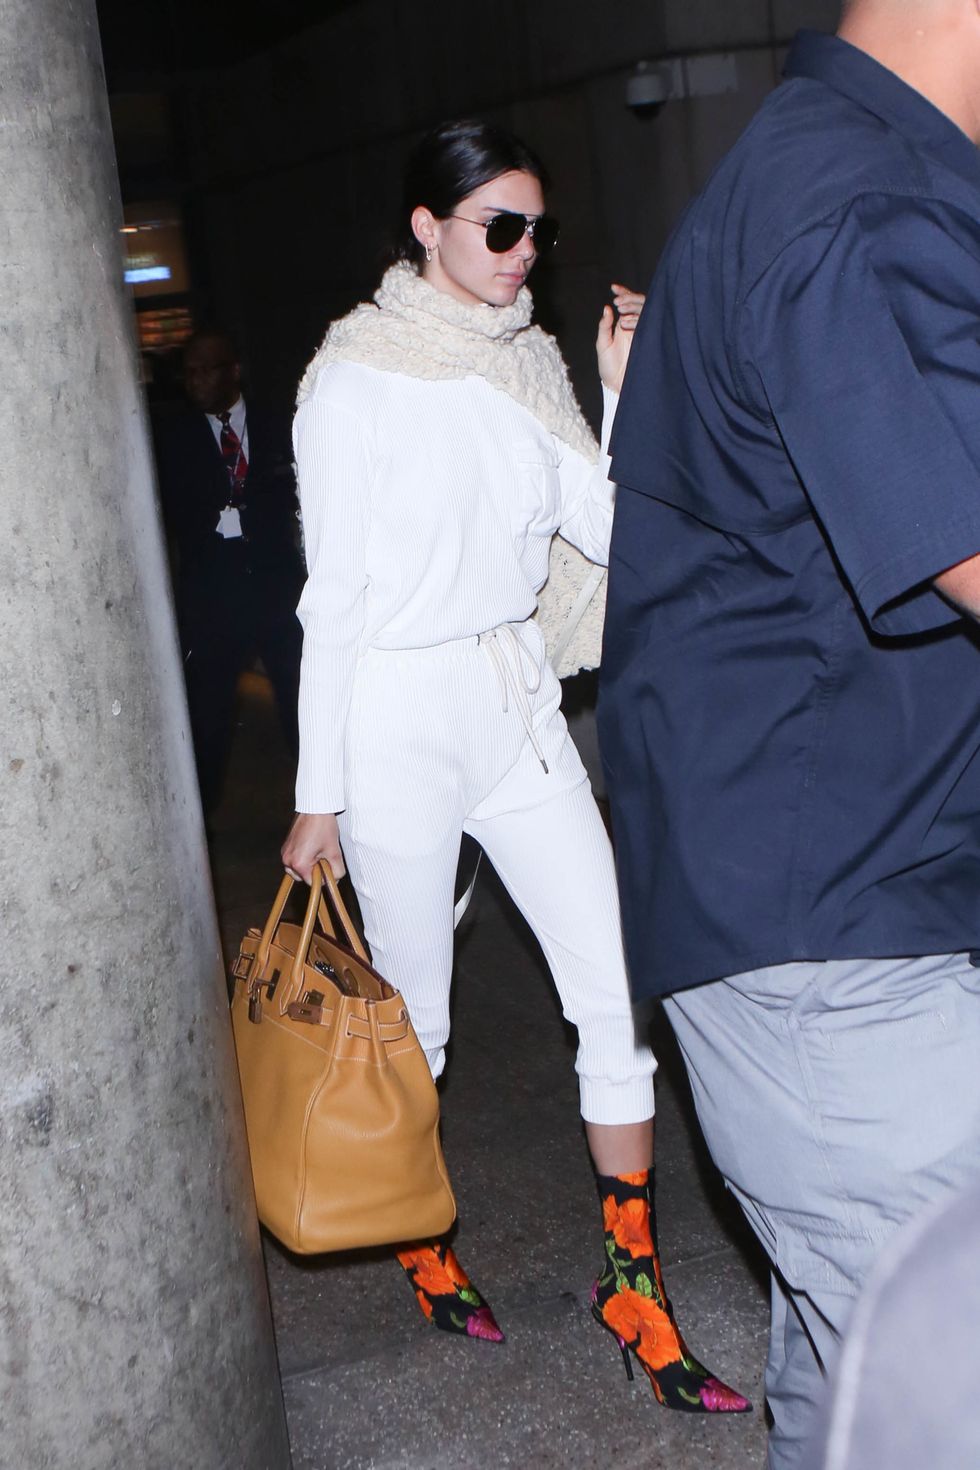 Kendall Jenner wears Balenciaga floral boots in airport